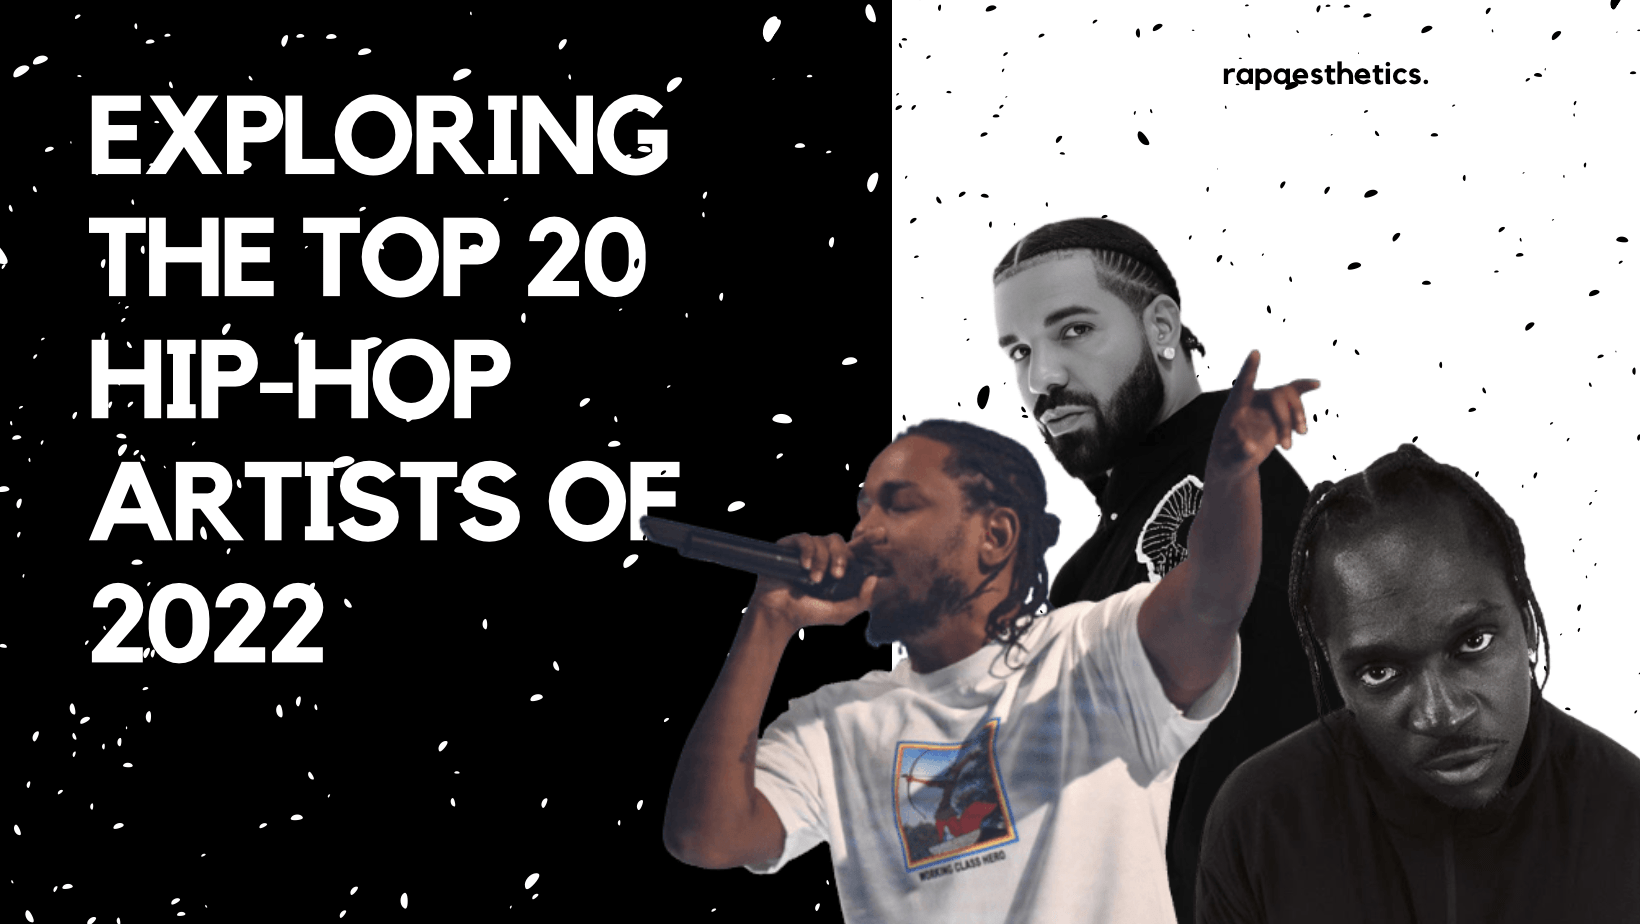 grus Smil Situation Exploring the Top 20 Hip-Hop Artists of 2022: Who's the Best Rapper of the  Year? | Rap Aesthetics